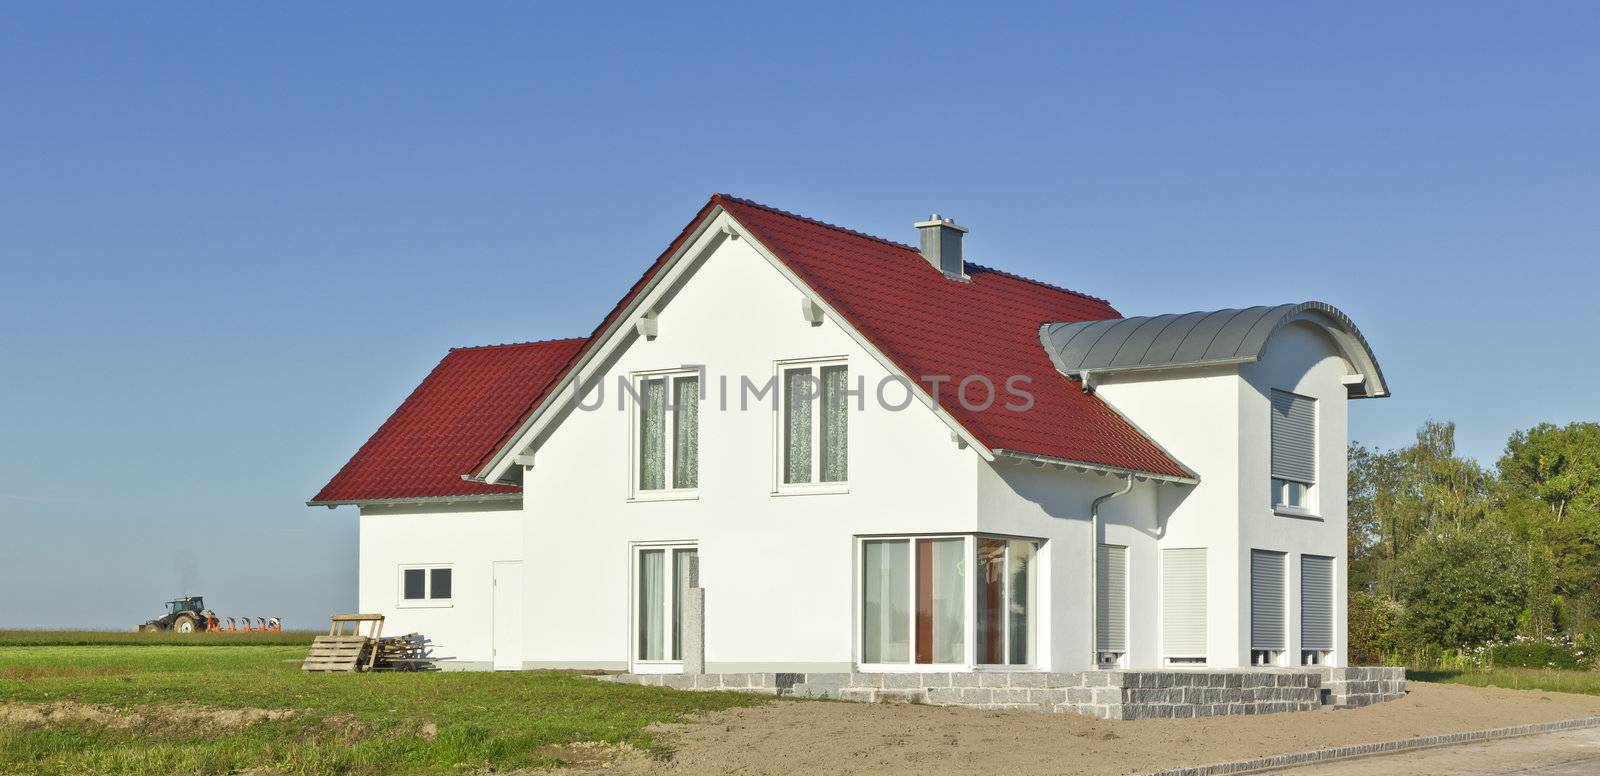 An image of a nice new house